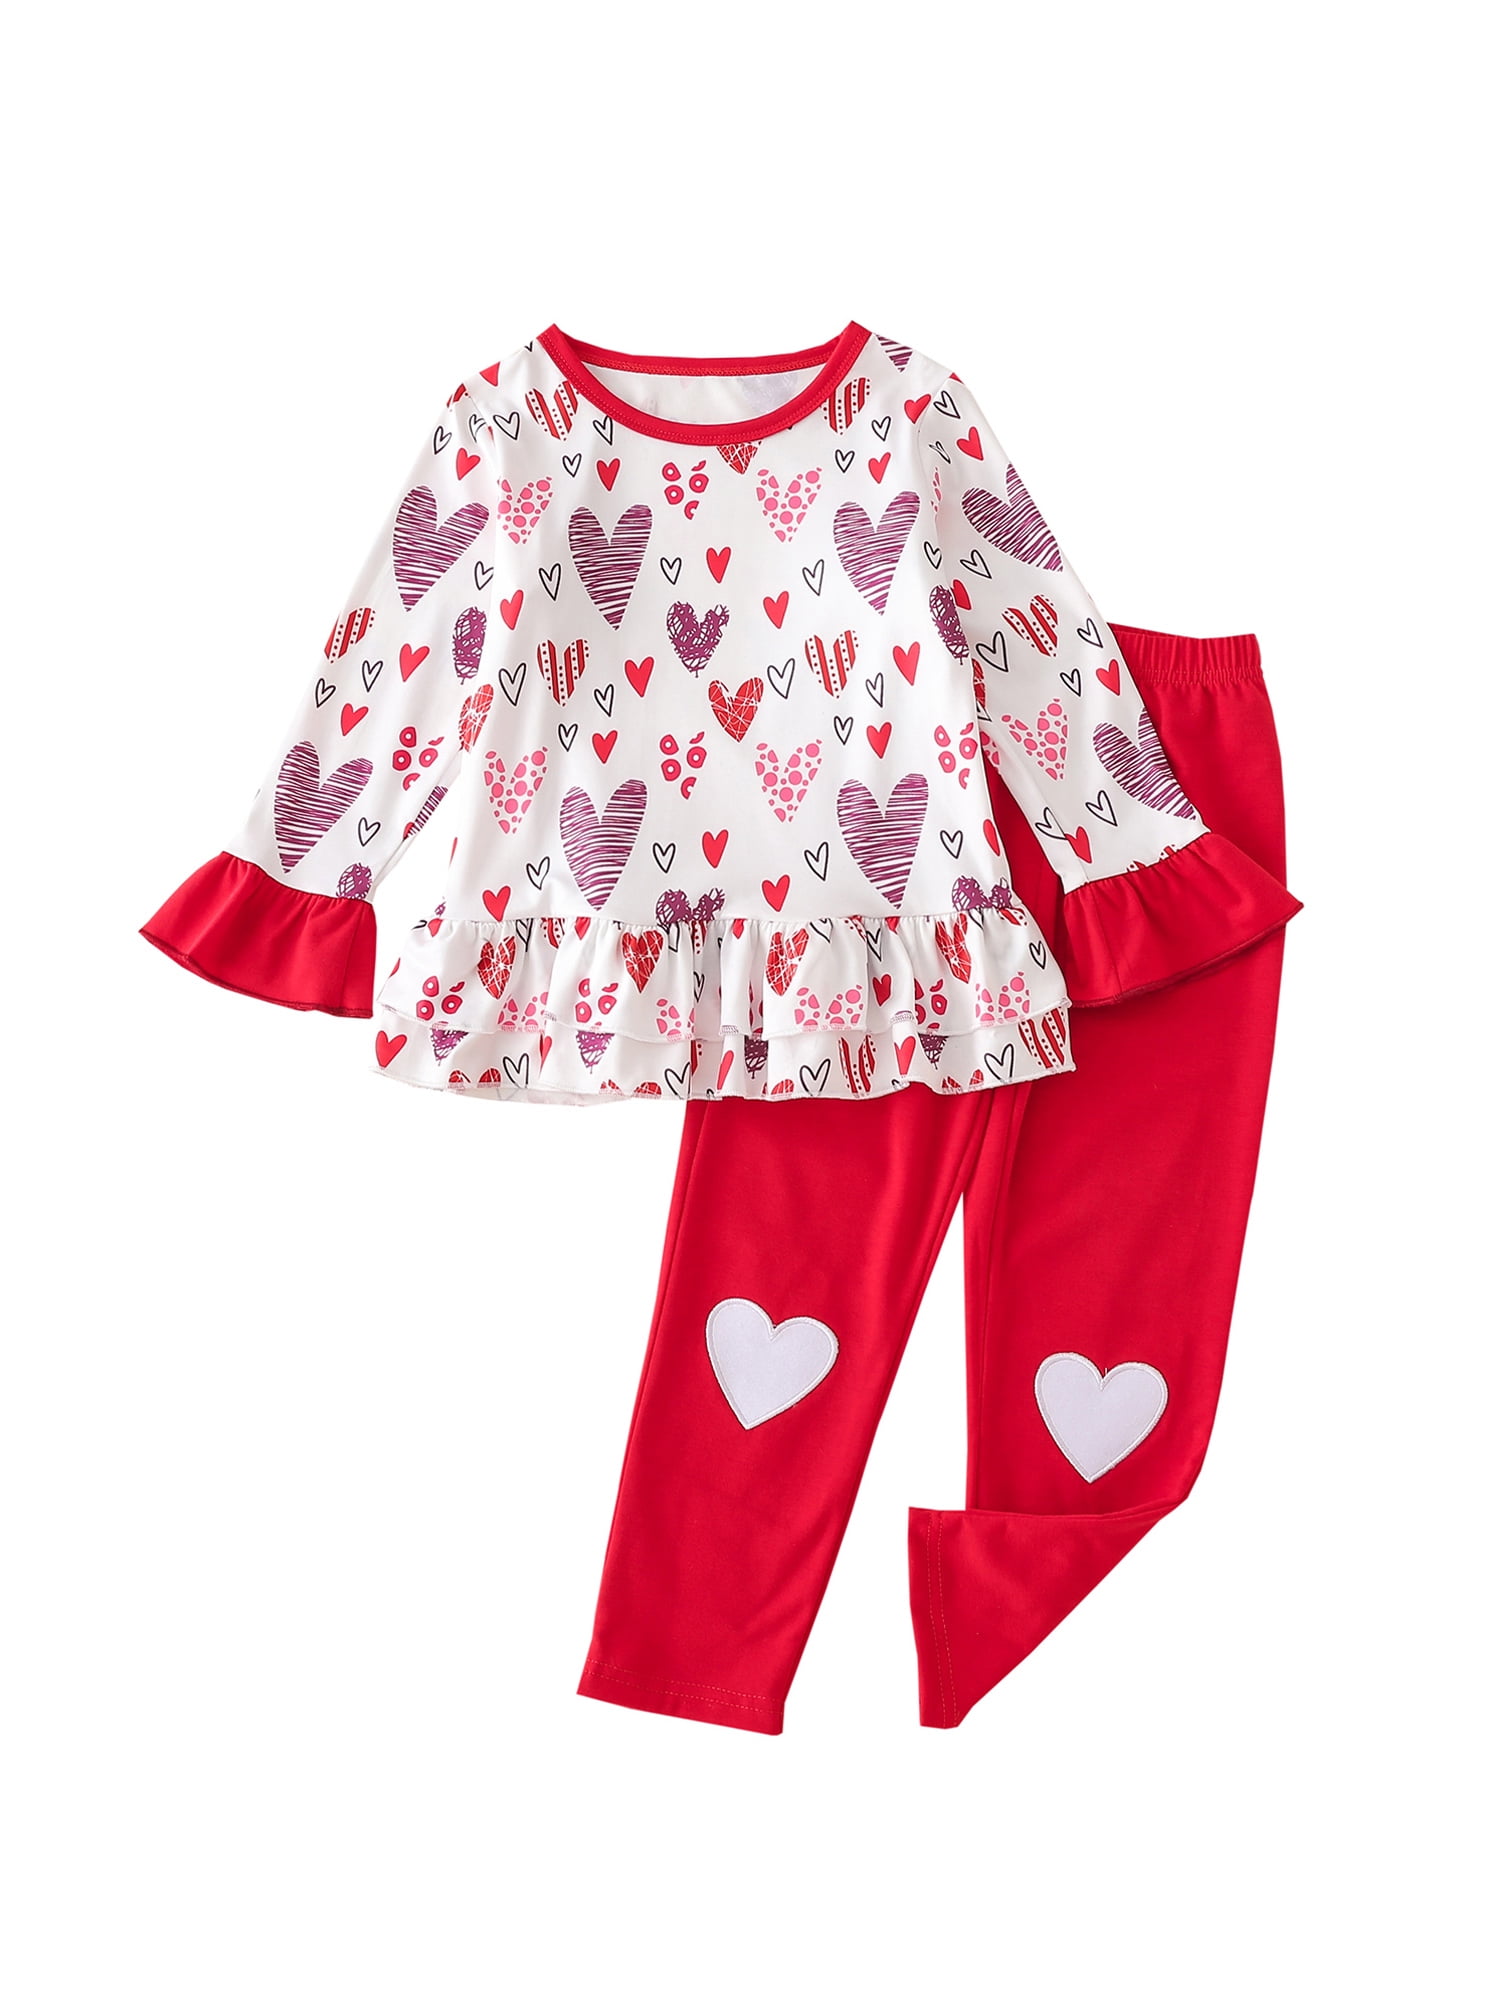 Pudcoco Toddlers Girls Two-Piece Outfits, Valentine's Day Theme Long ...